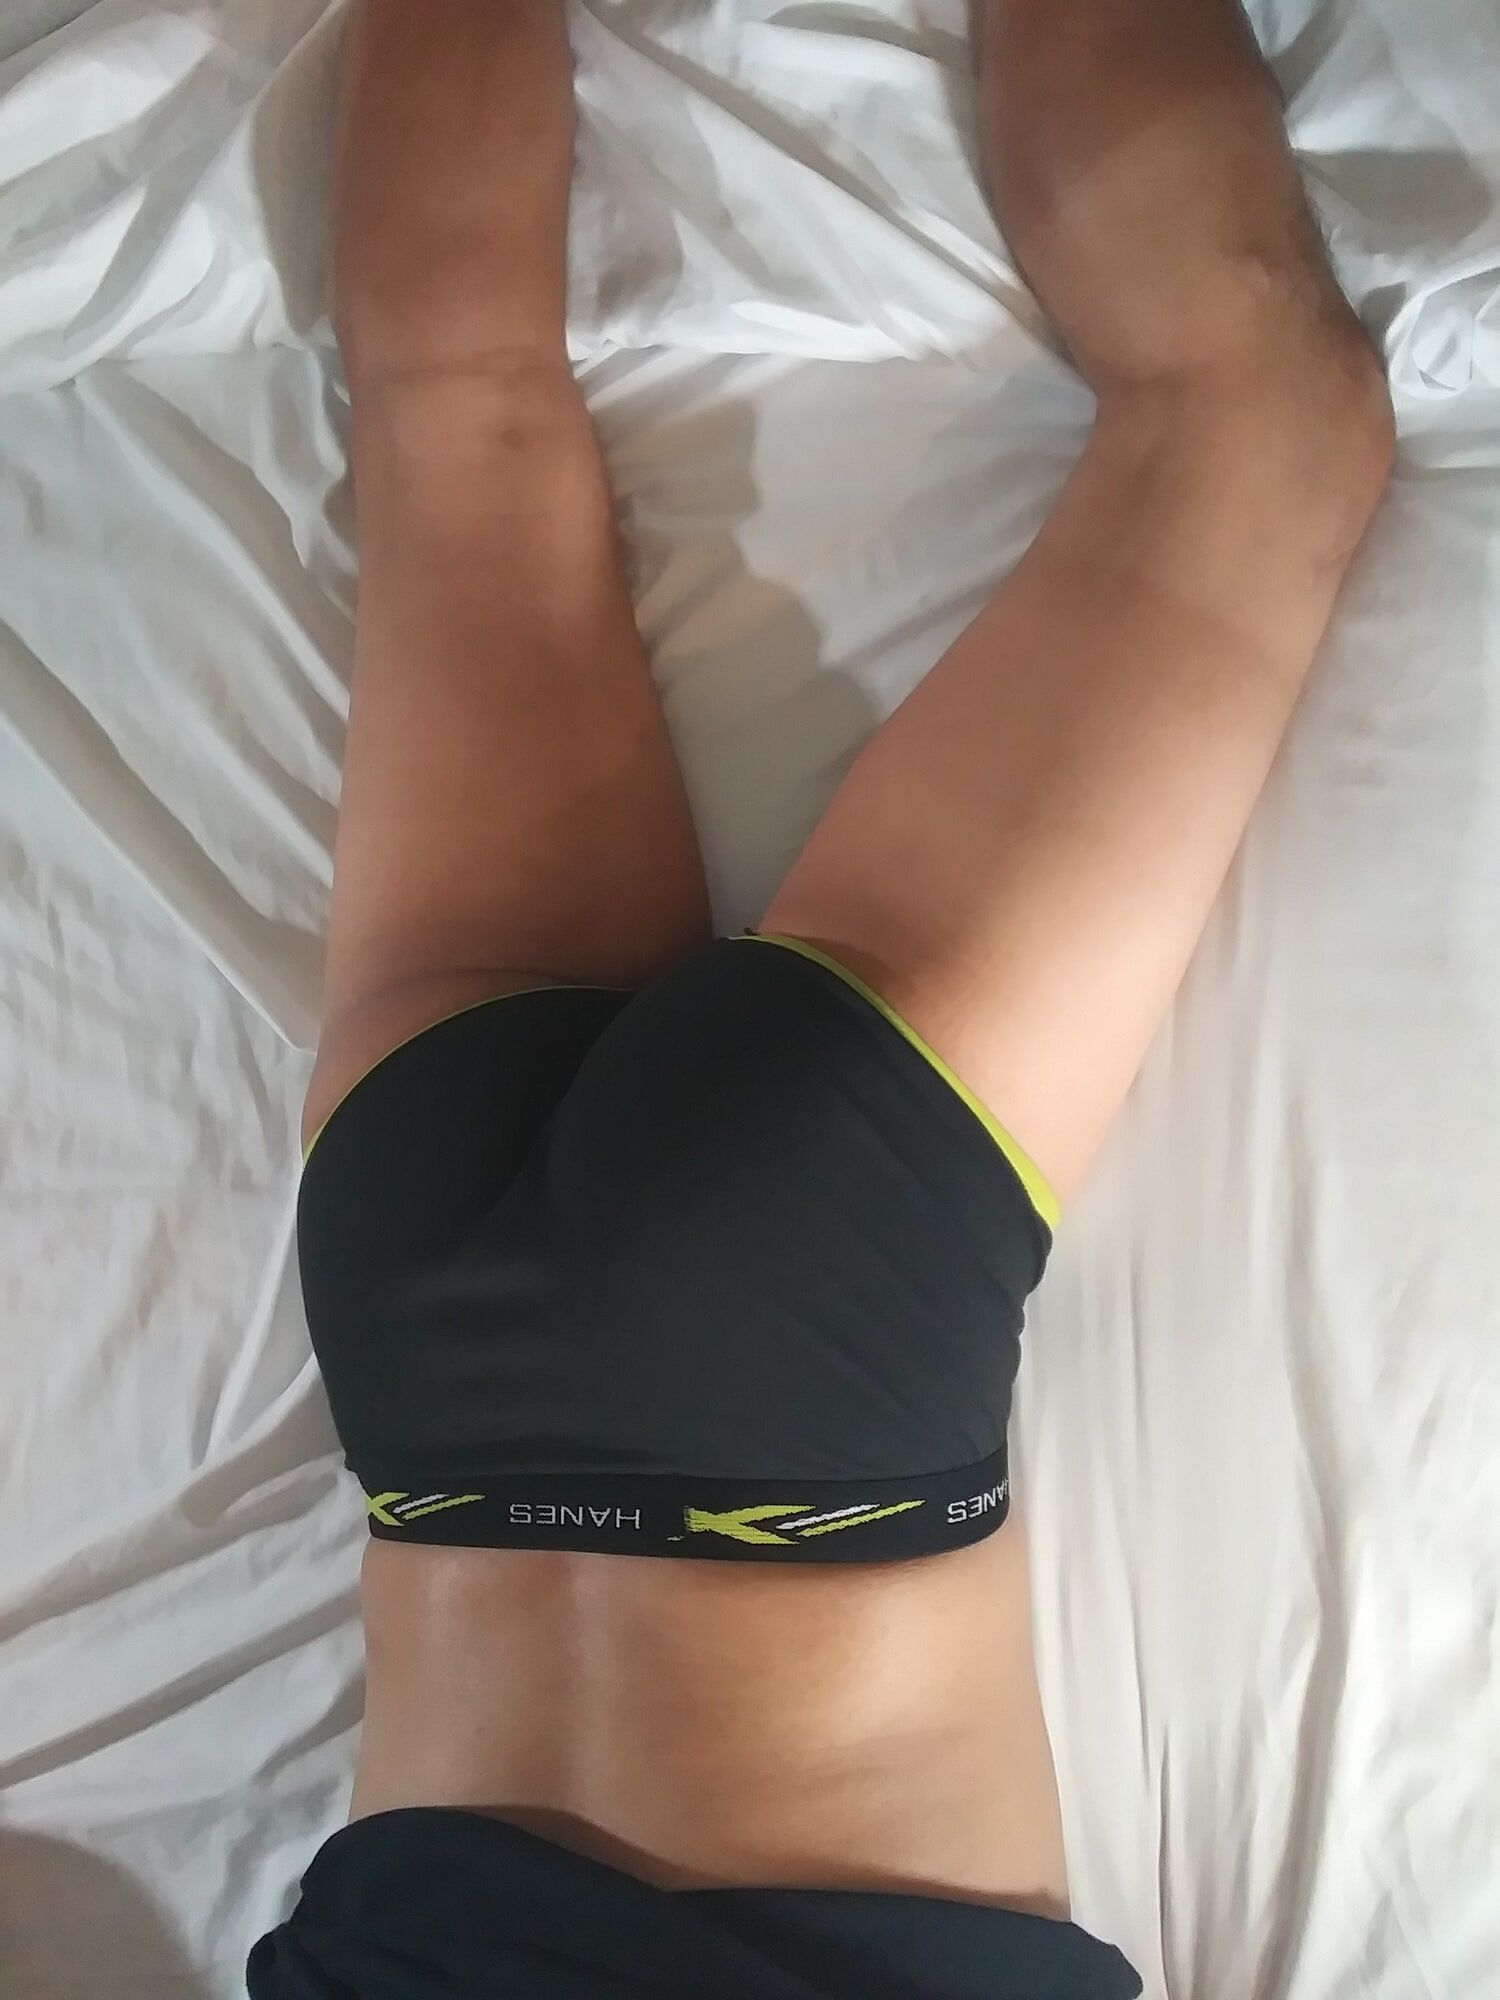 Hot asian gay showing off his tight butt wearing shorts and  #11